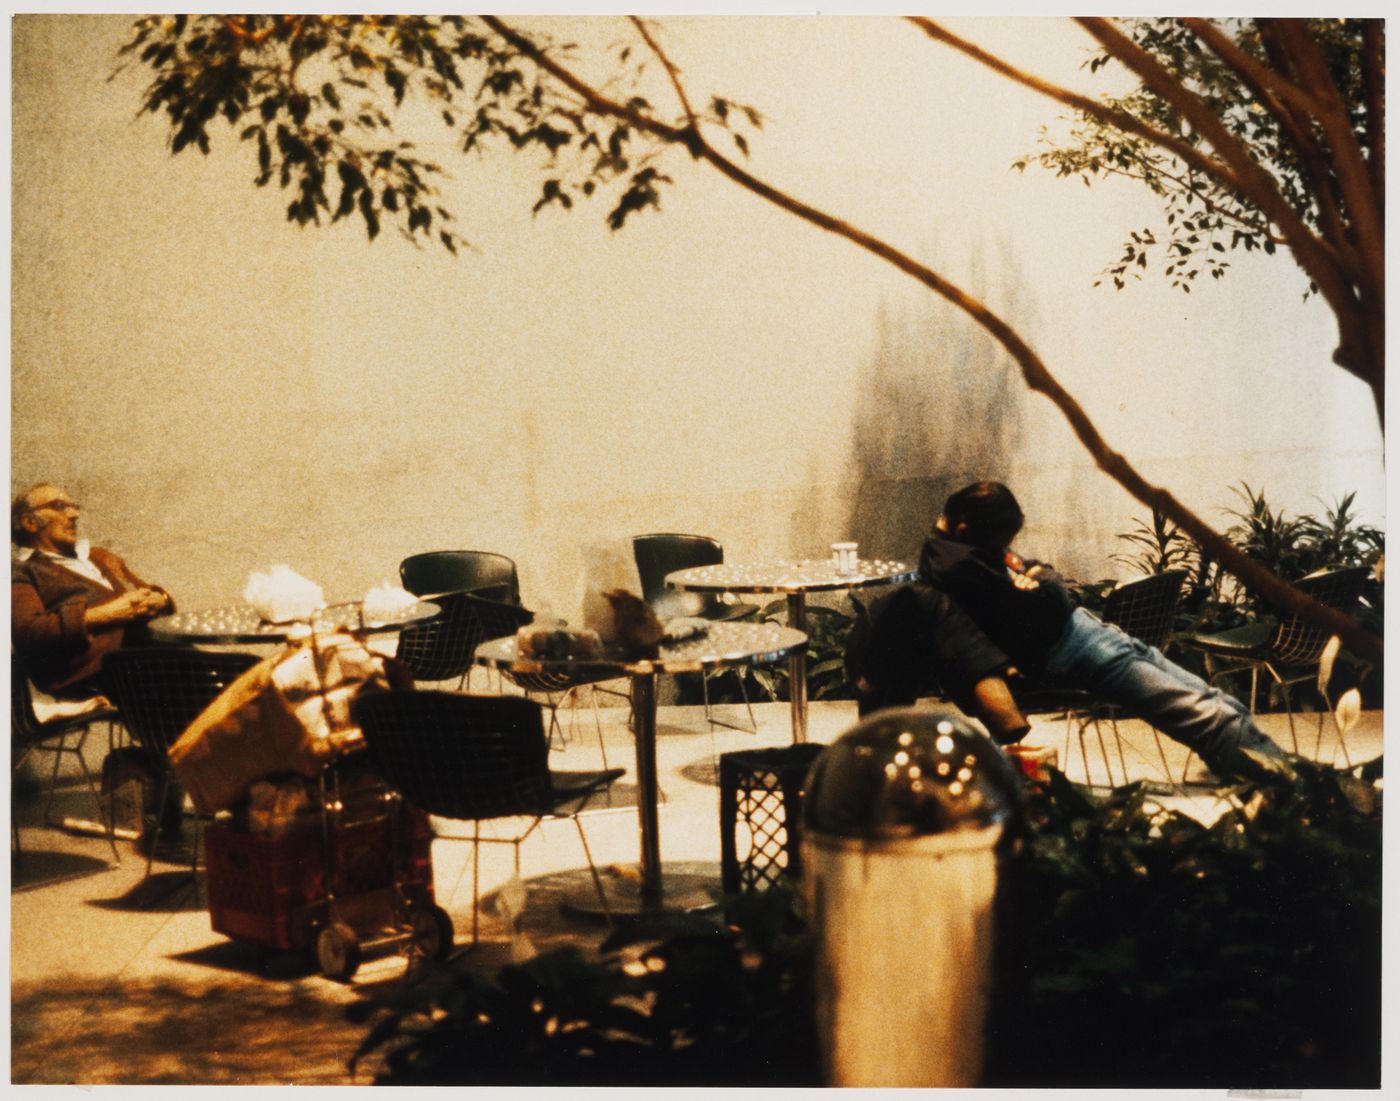 Homeless People in Park Avenue Atrium, New York, N.Y., from the series "Private Public Spaces: The Corporate Atrium Garden"